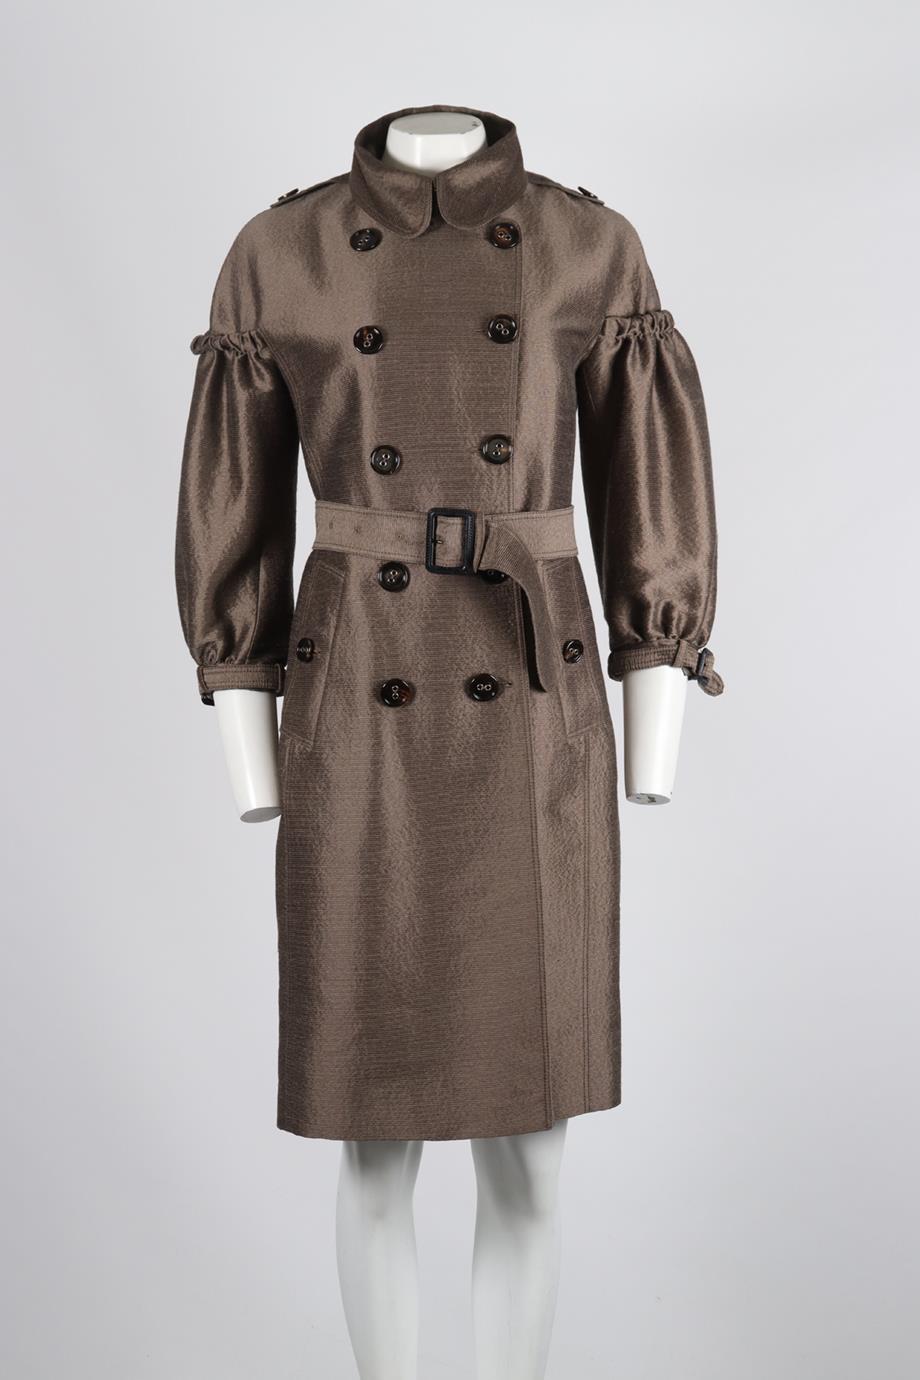 BURBERRY BELTED DOUBLE BREASTED WOOL AND SILK BLEND TRENCH COAT IT 44 UK 12